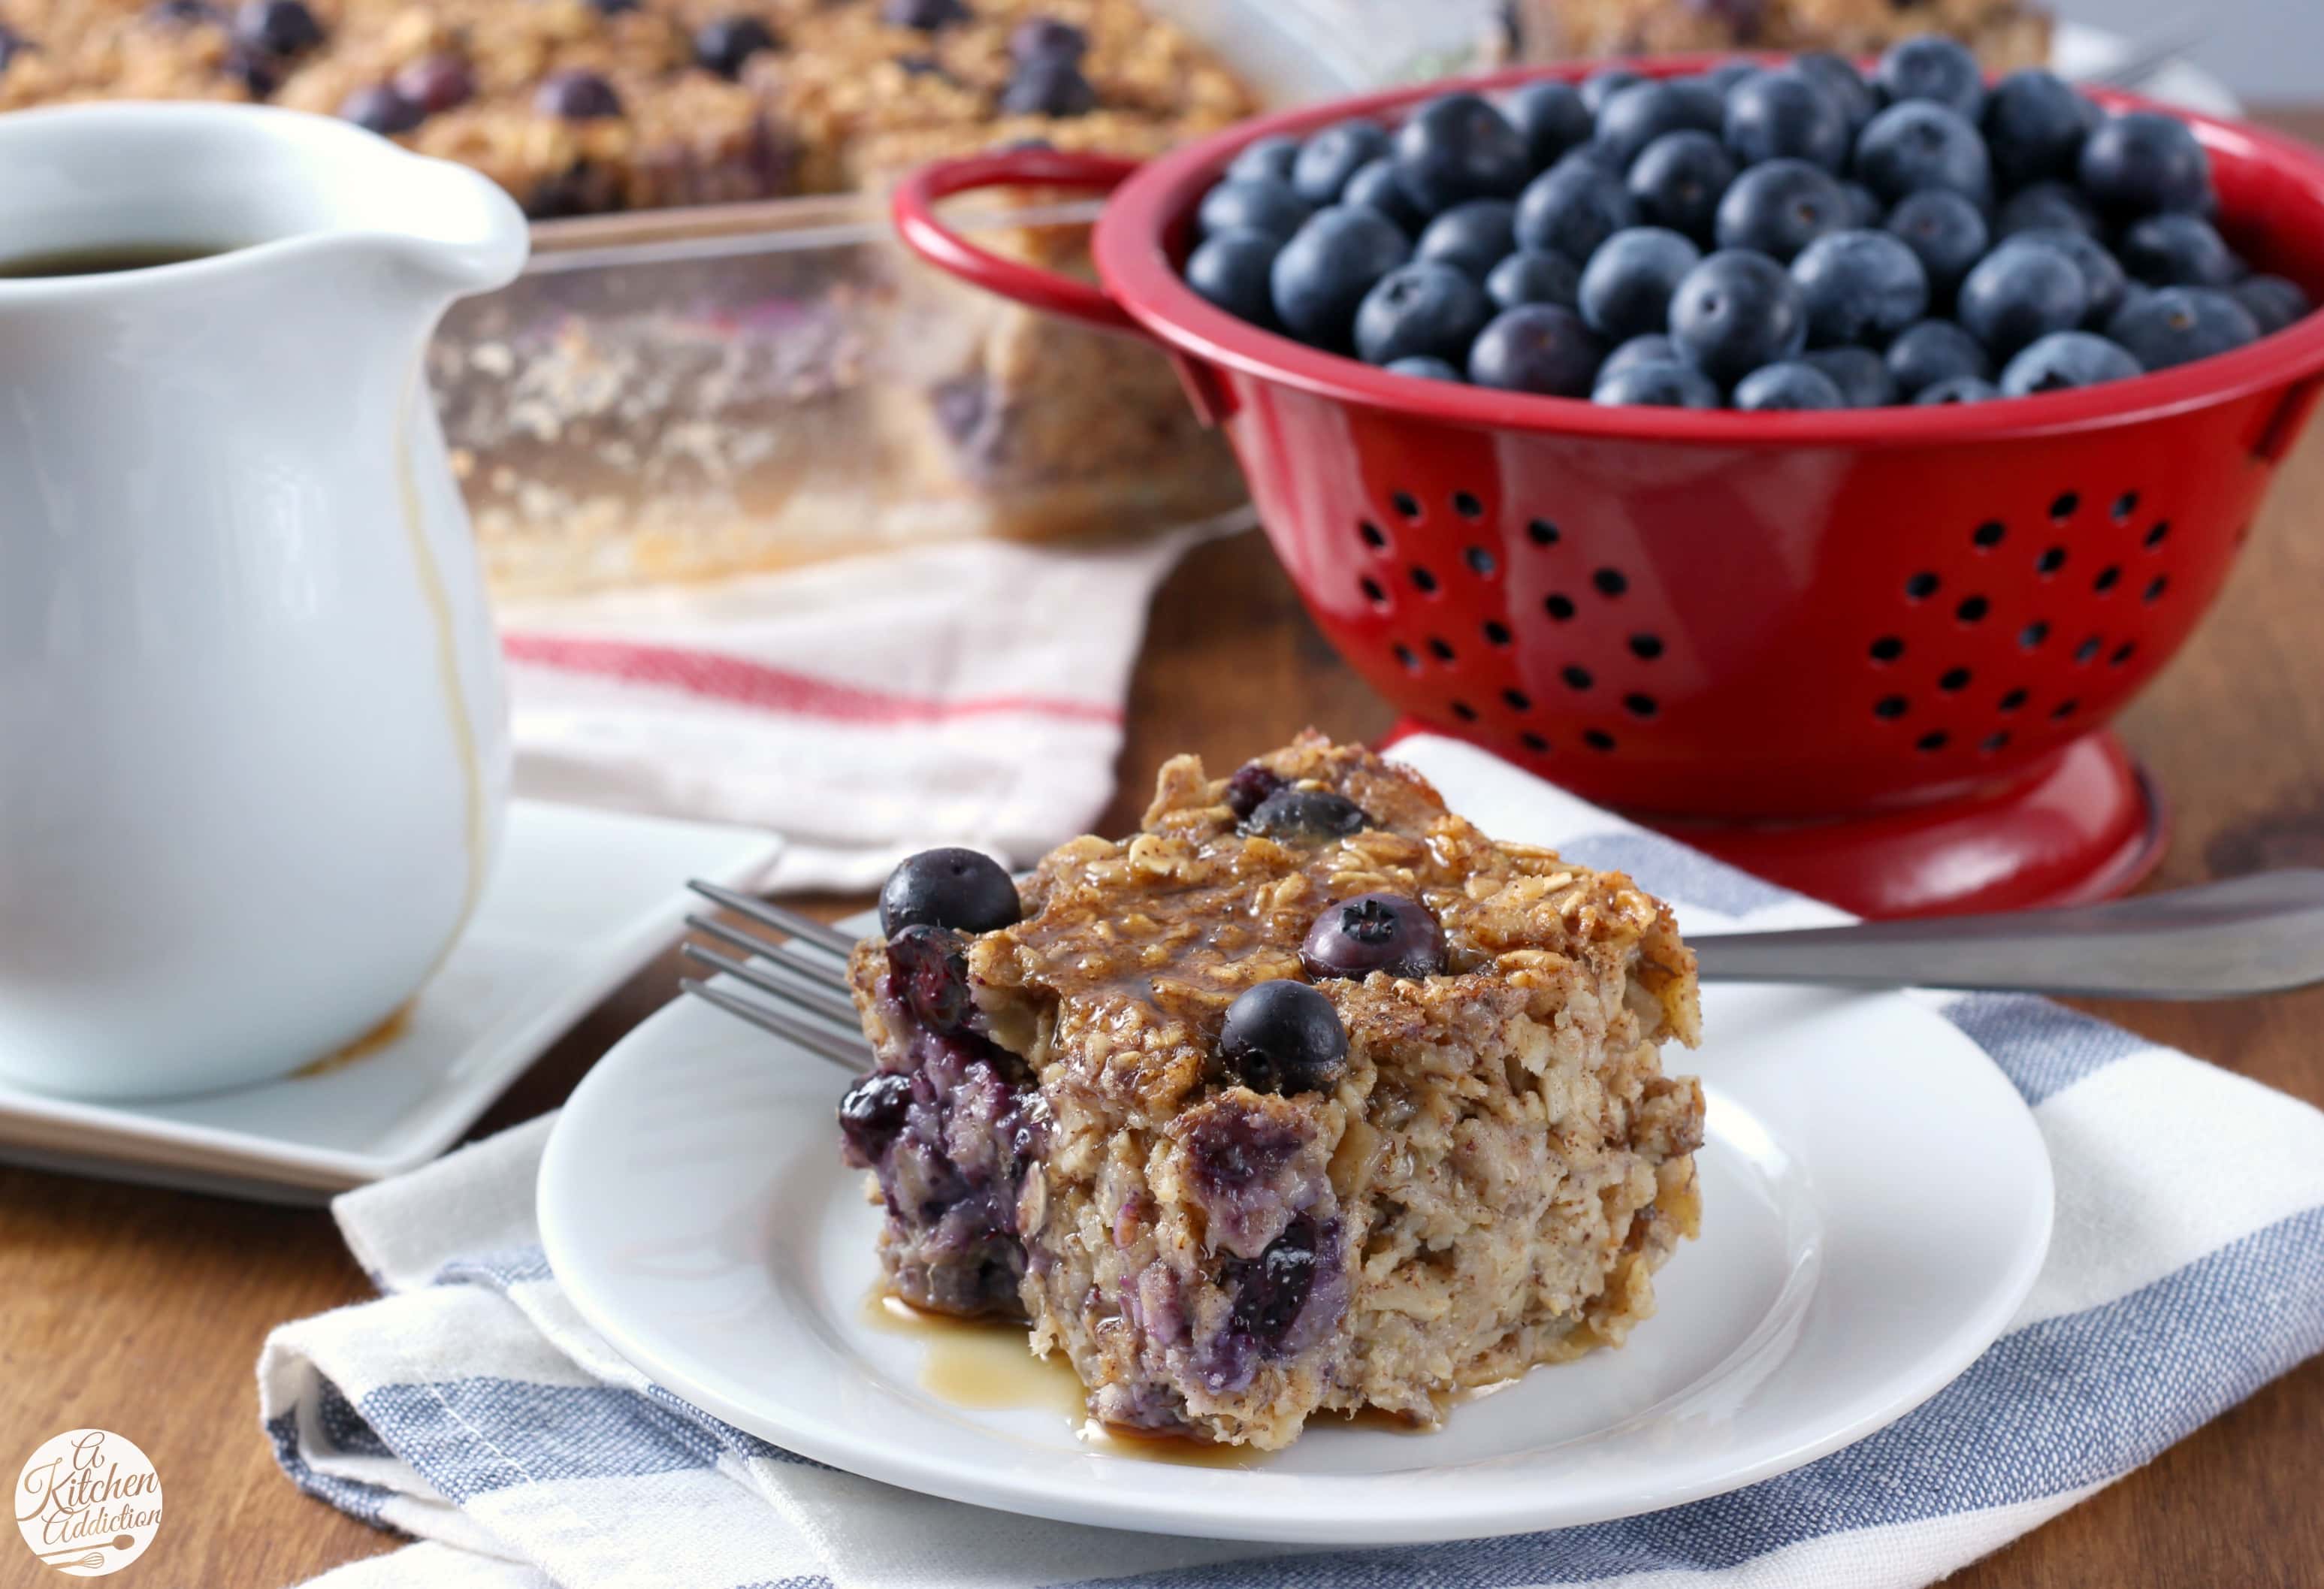 Blueberry Banana Bread Baked Oatmeal Recipe from A Kitchen Addiction